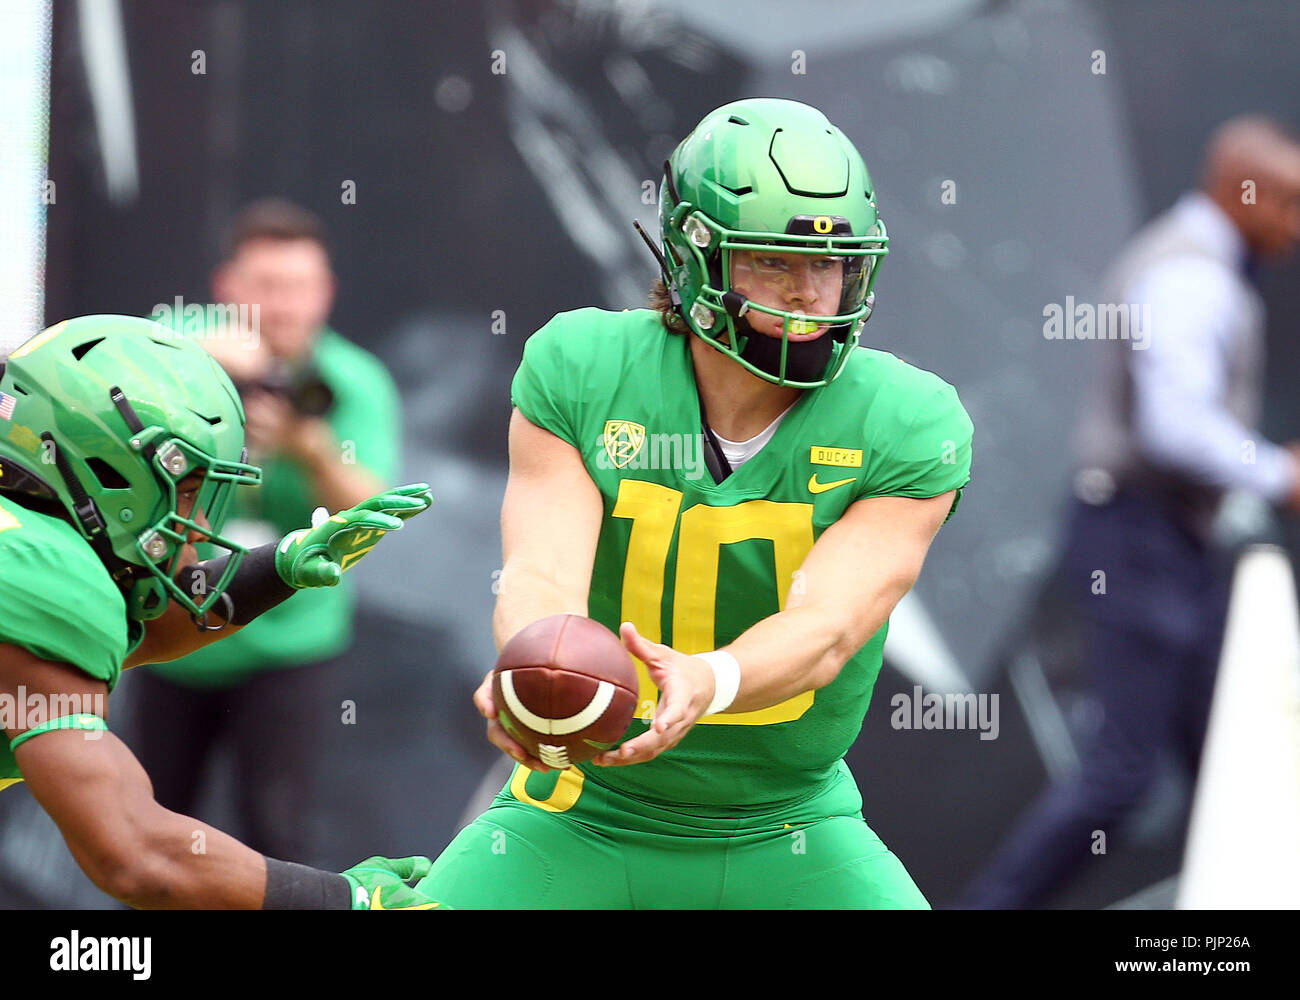 Autzen Stadium, Eugene, OR, USA. 8th Sep, 2018. Oregon Ducks quarterback Justin Herbert (10) hands off the ball during the NCAA football game between the Portland State Vikings and the Oregon Ducks at Autzen Stadium, Eugene, OR. Larry C. Lawson/CSM/Alamy Live News Stock Photo